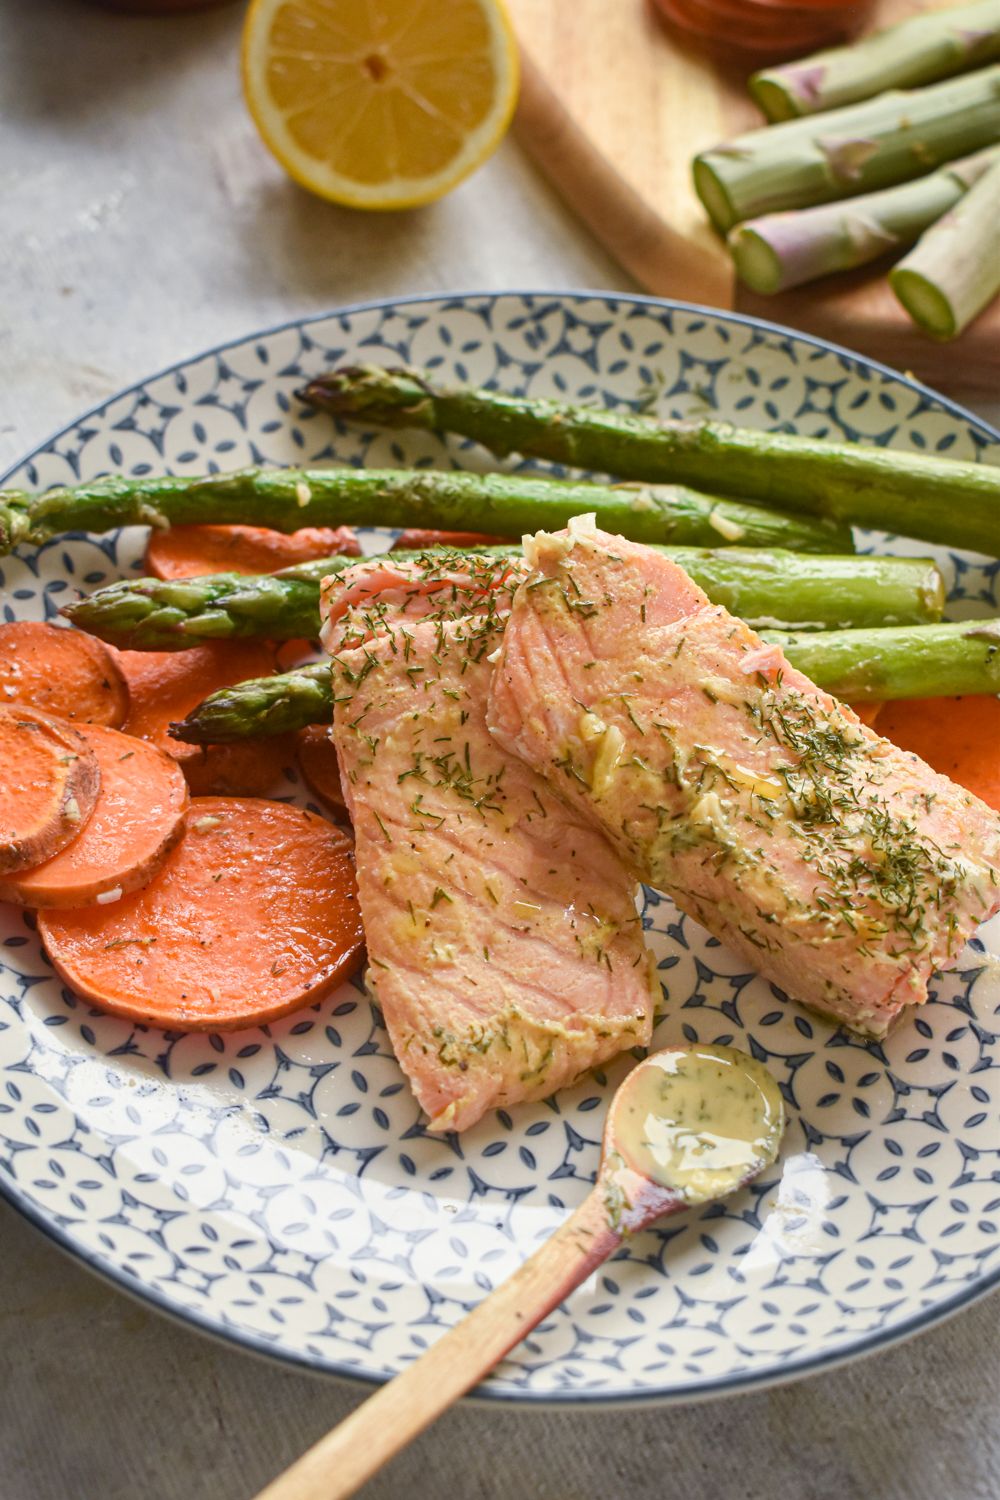 Roasted salmon with sweet potatoes, asparagus, and a lemon dill sauce on a plate.